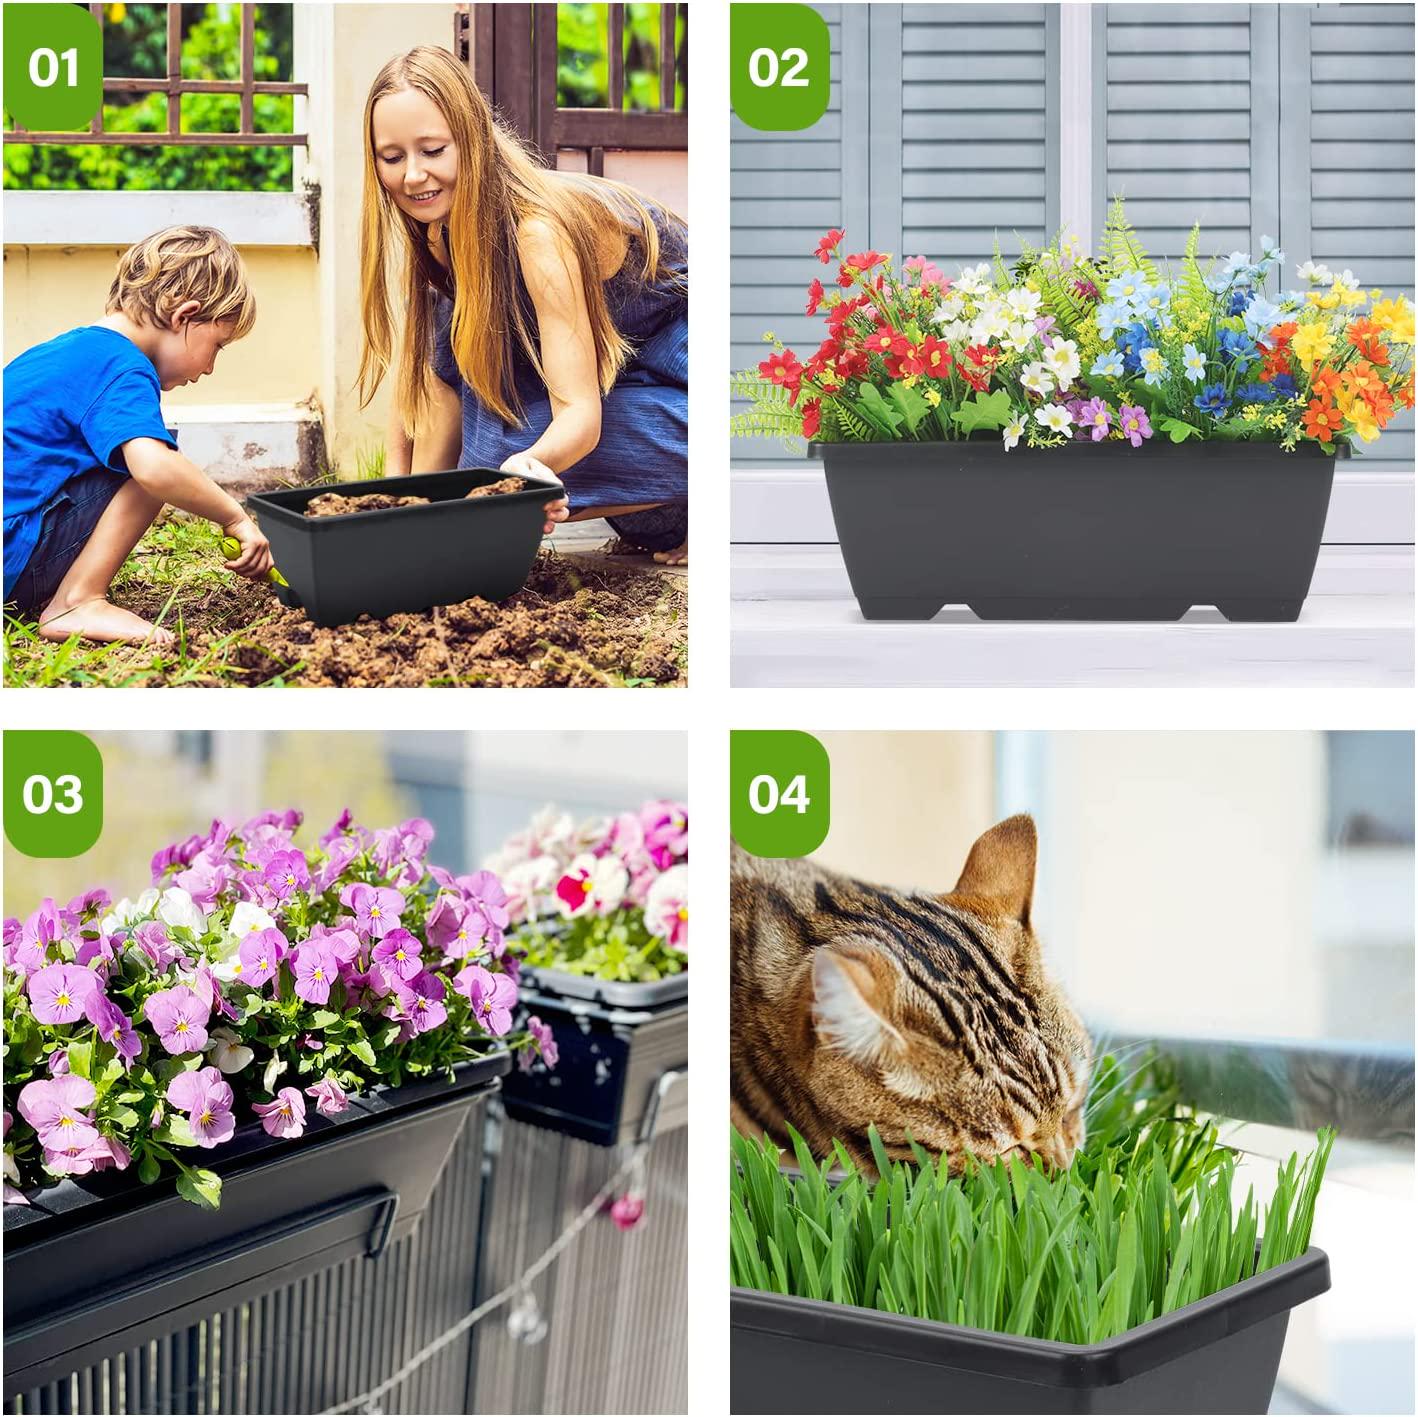 Whonline 8 Pack Window Box Planter 17 Inch Black Plastic Vegetable Flower Planters Boxes Rectangular Flower Pots with Saucers for Indoor Outdoor Garden Patio